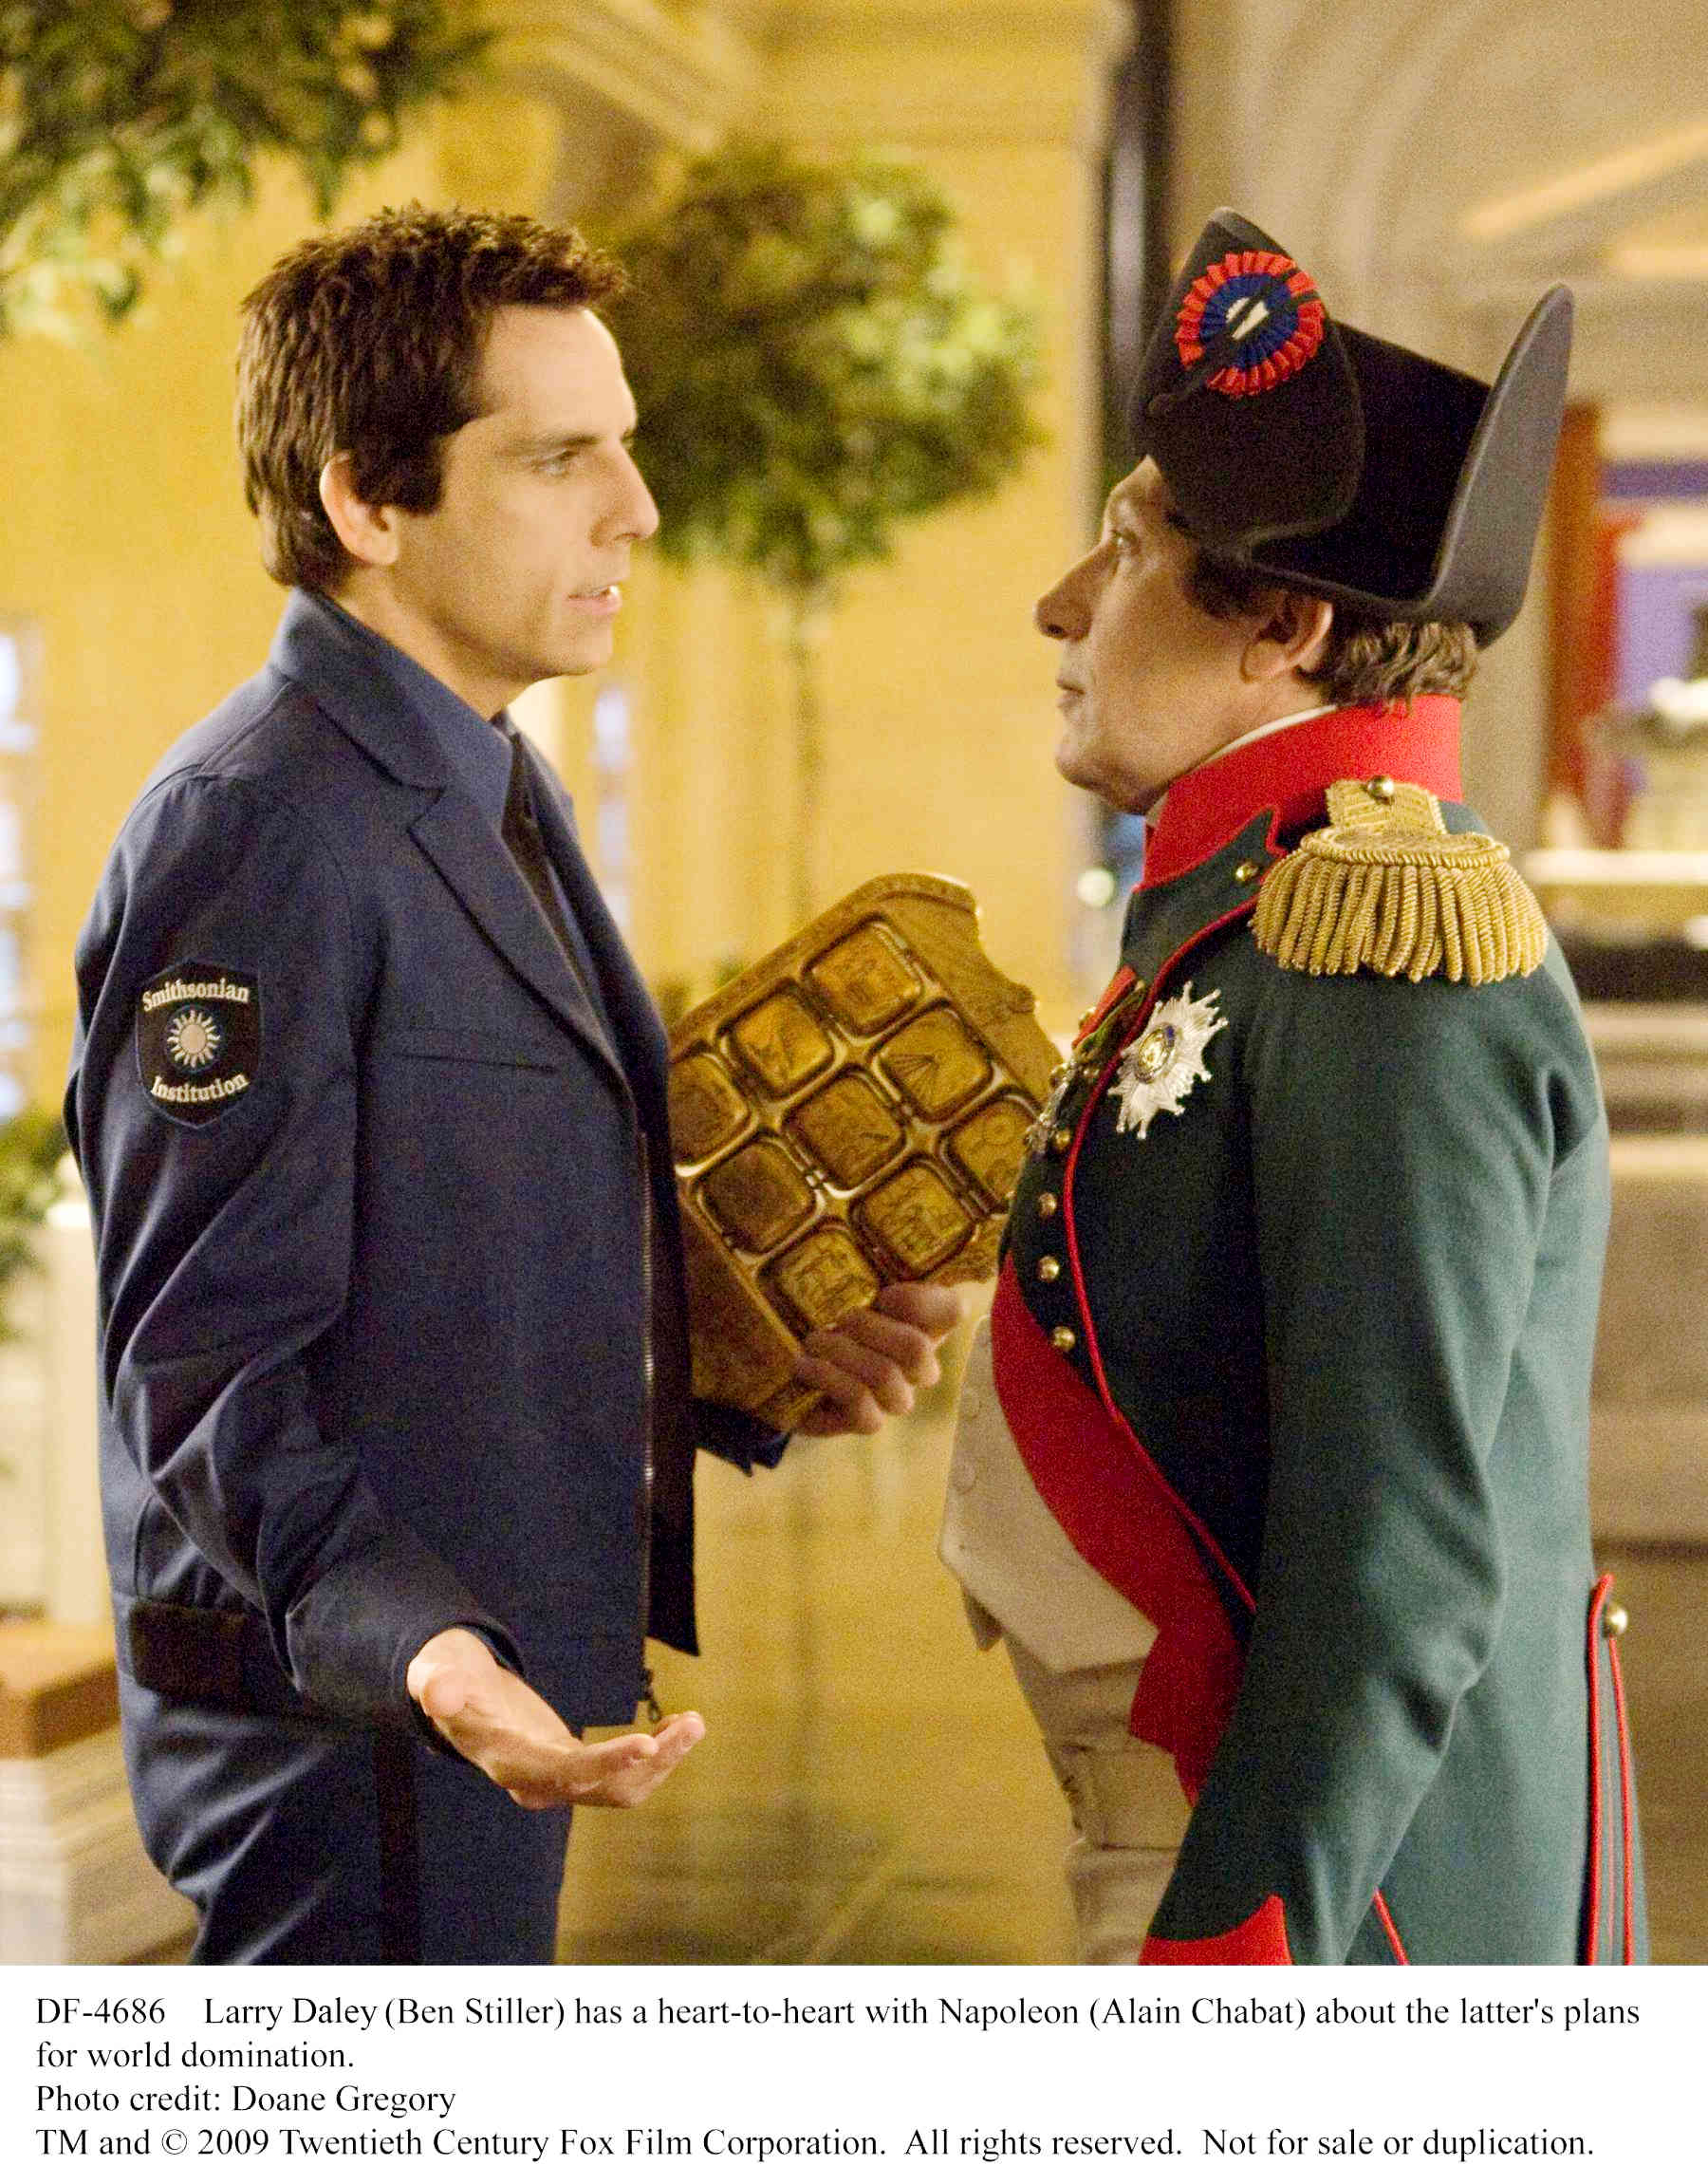 Ben Stiller stars as Larry Daley and Alain Chabat stars as Napoleon in 20th Century Fox's Night at the Museum 2: Battle of the Smithsonian (2009). Photo credit by Doane Gregory.